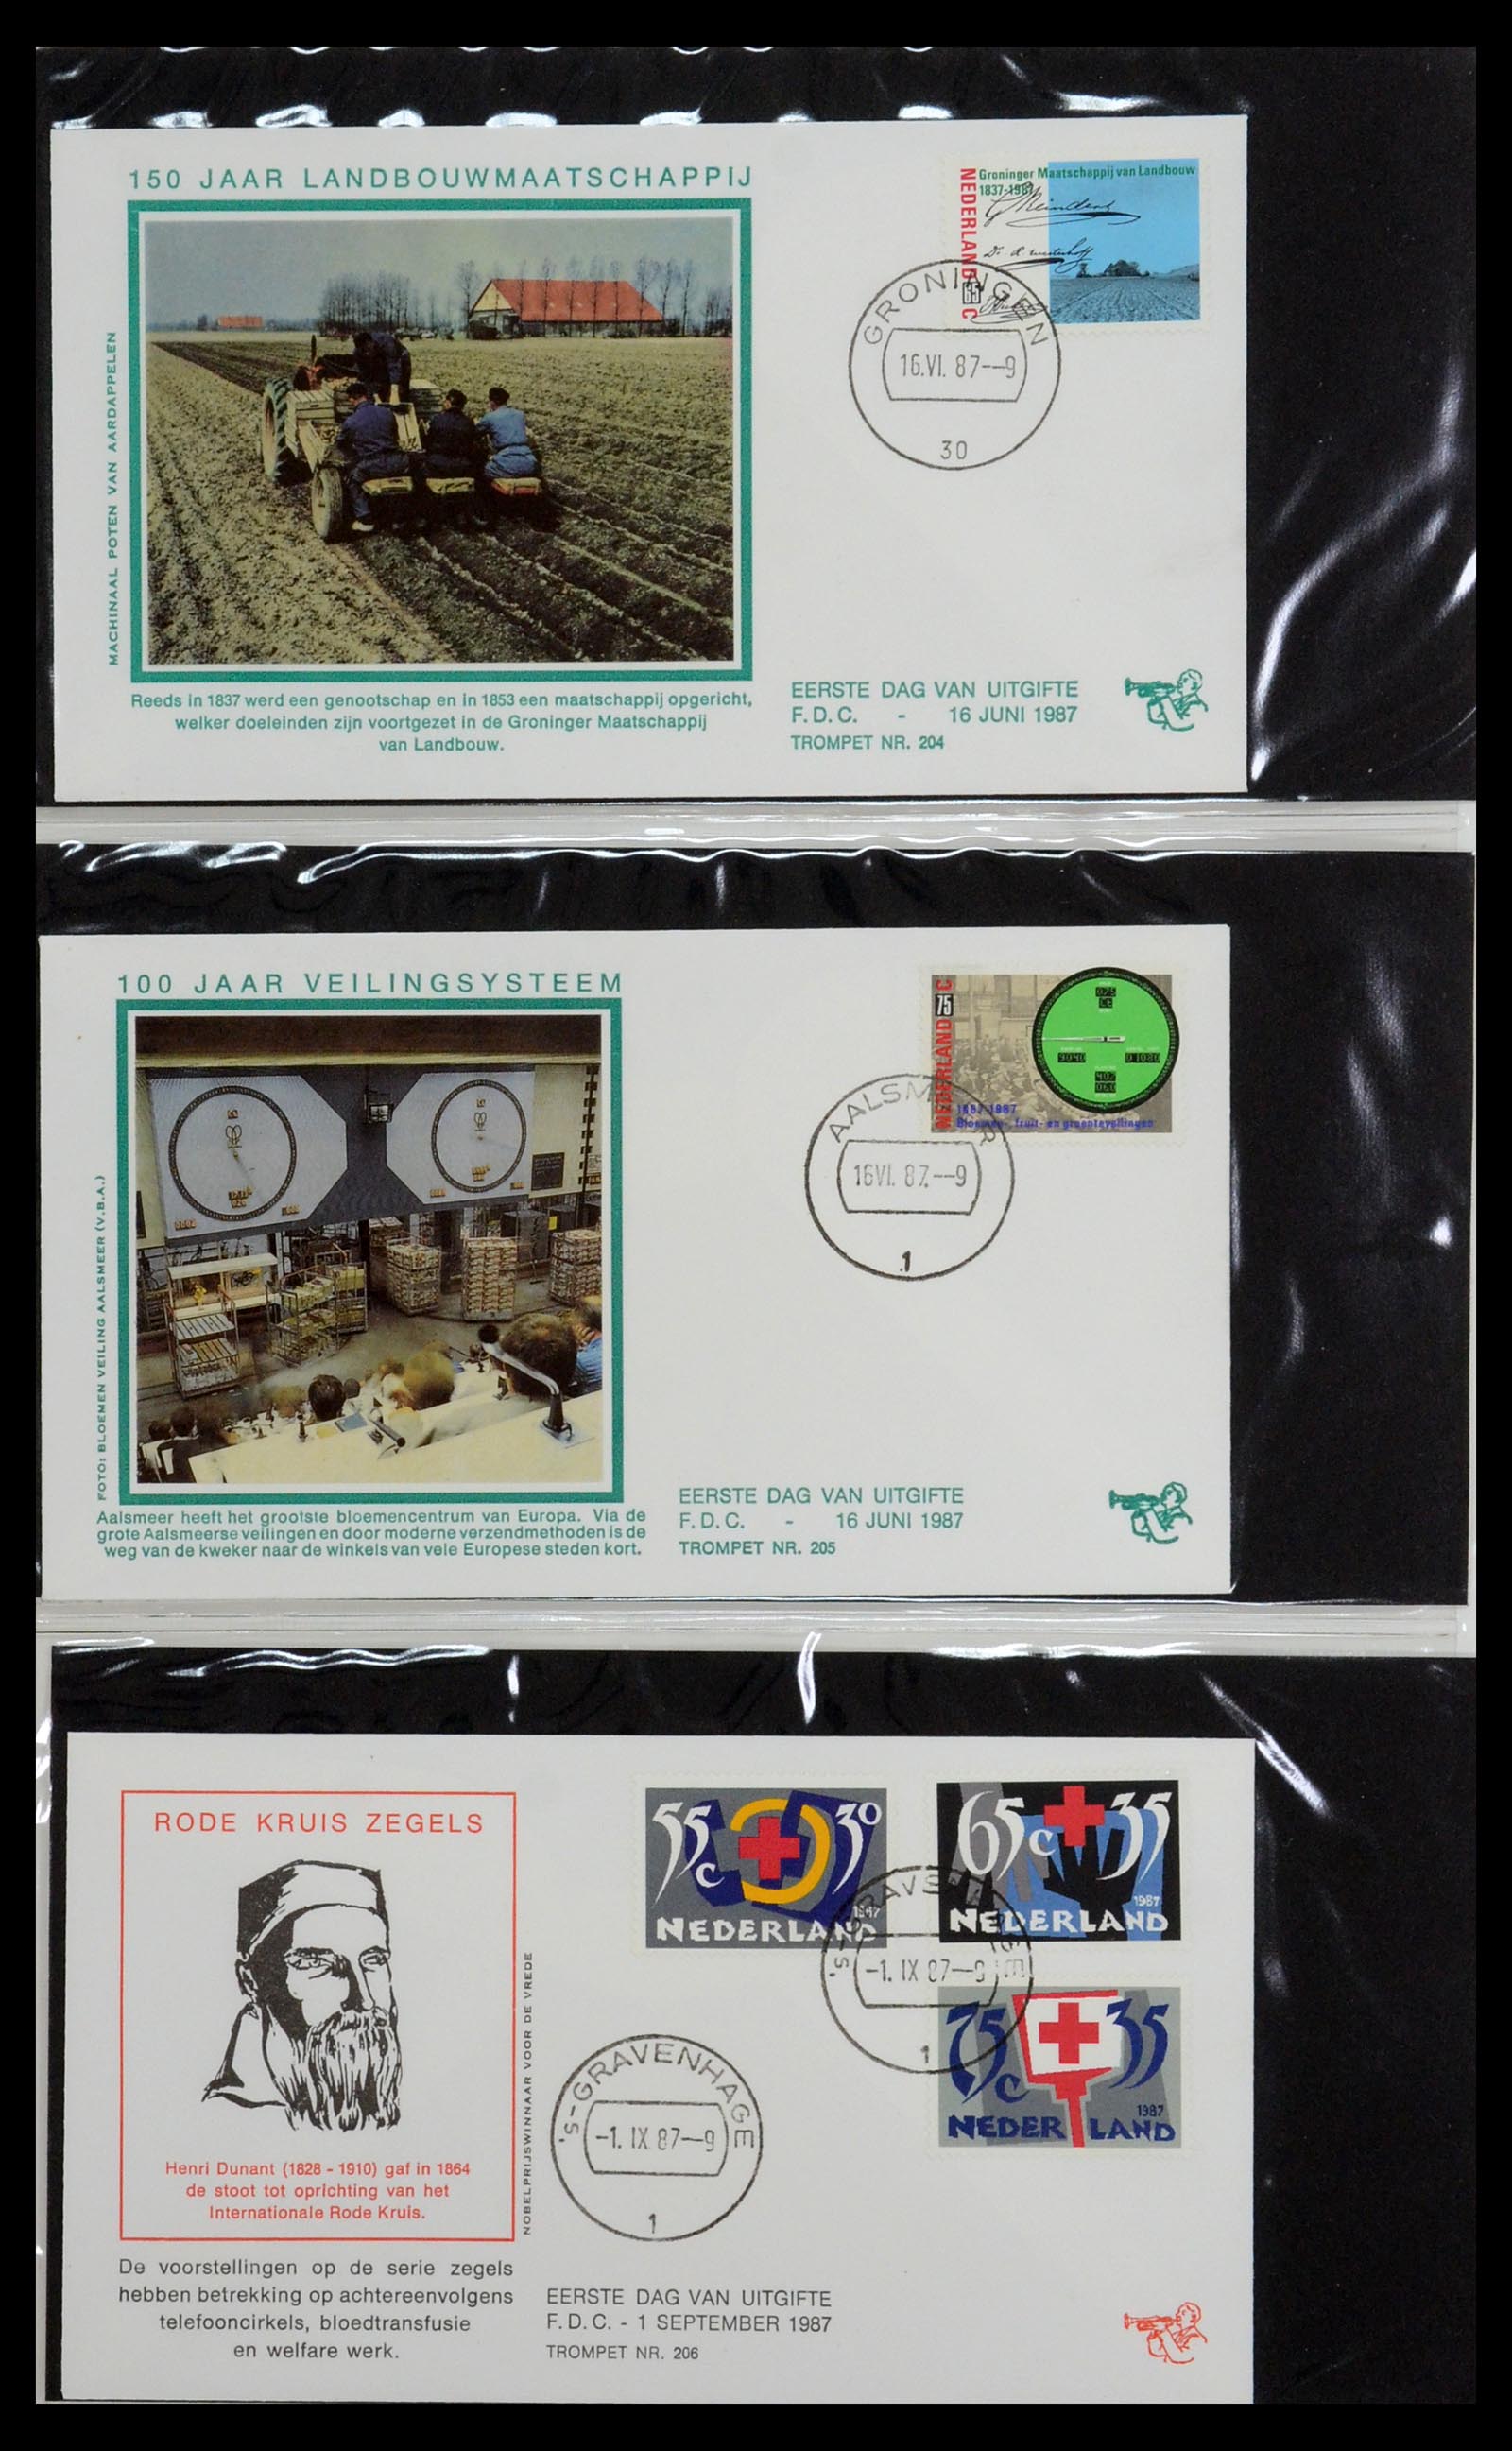 36342 078 - Stamp collection 36342 Netherlands Tromp FDC's 1968-1987.